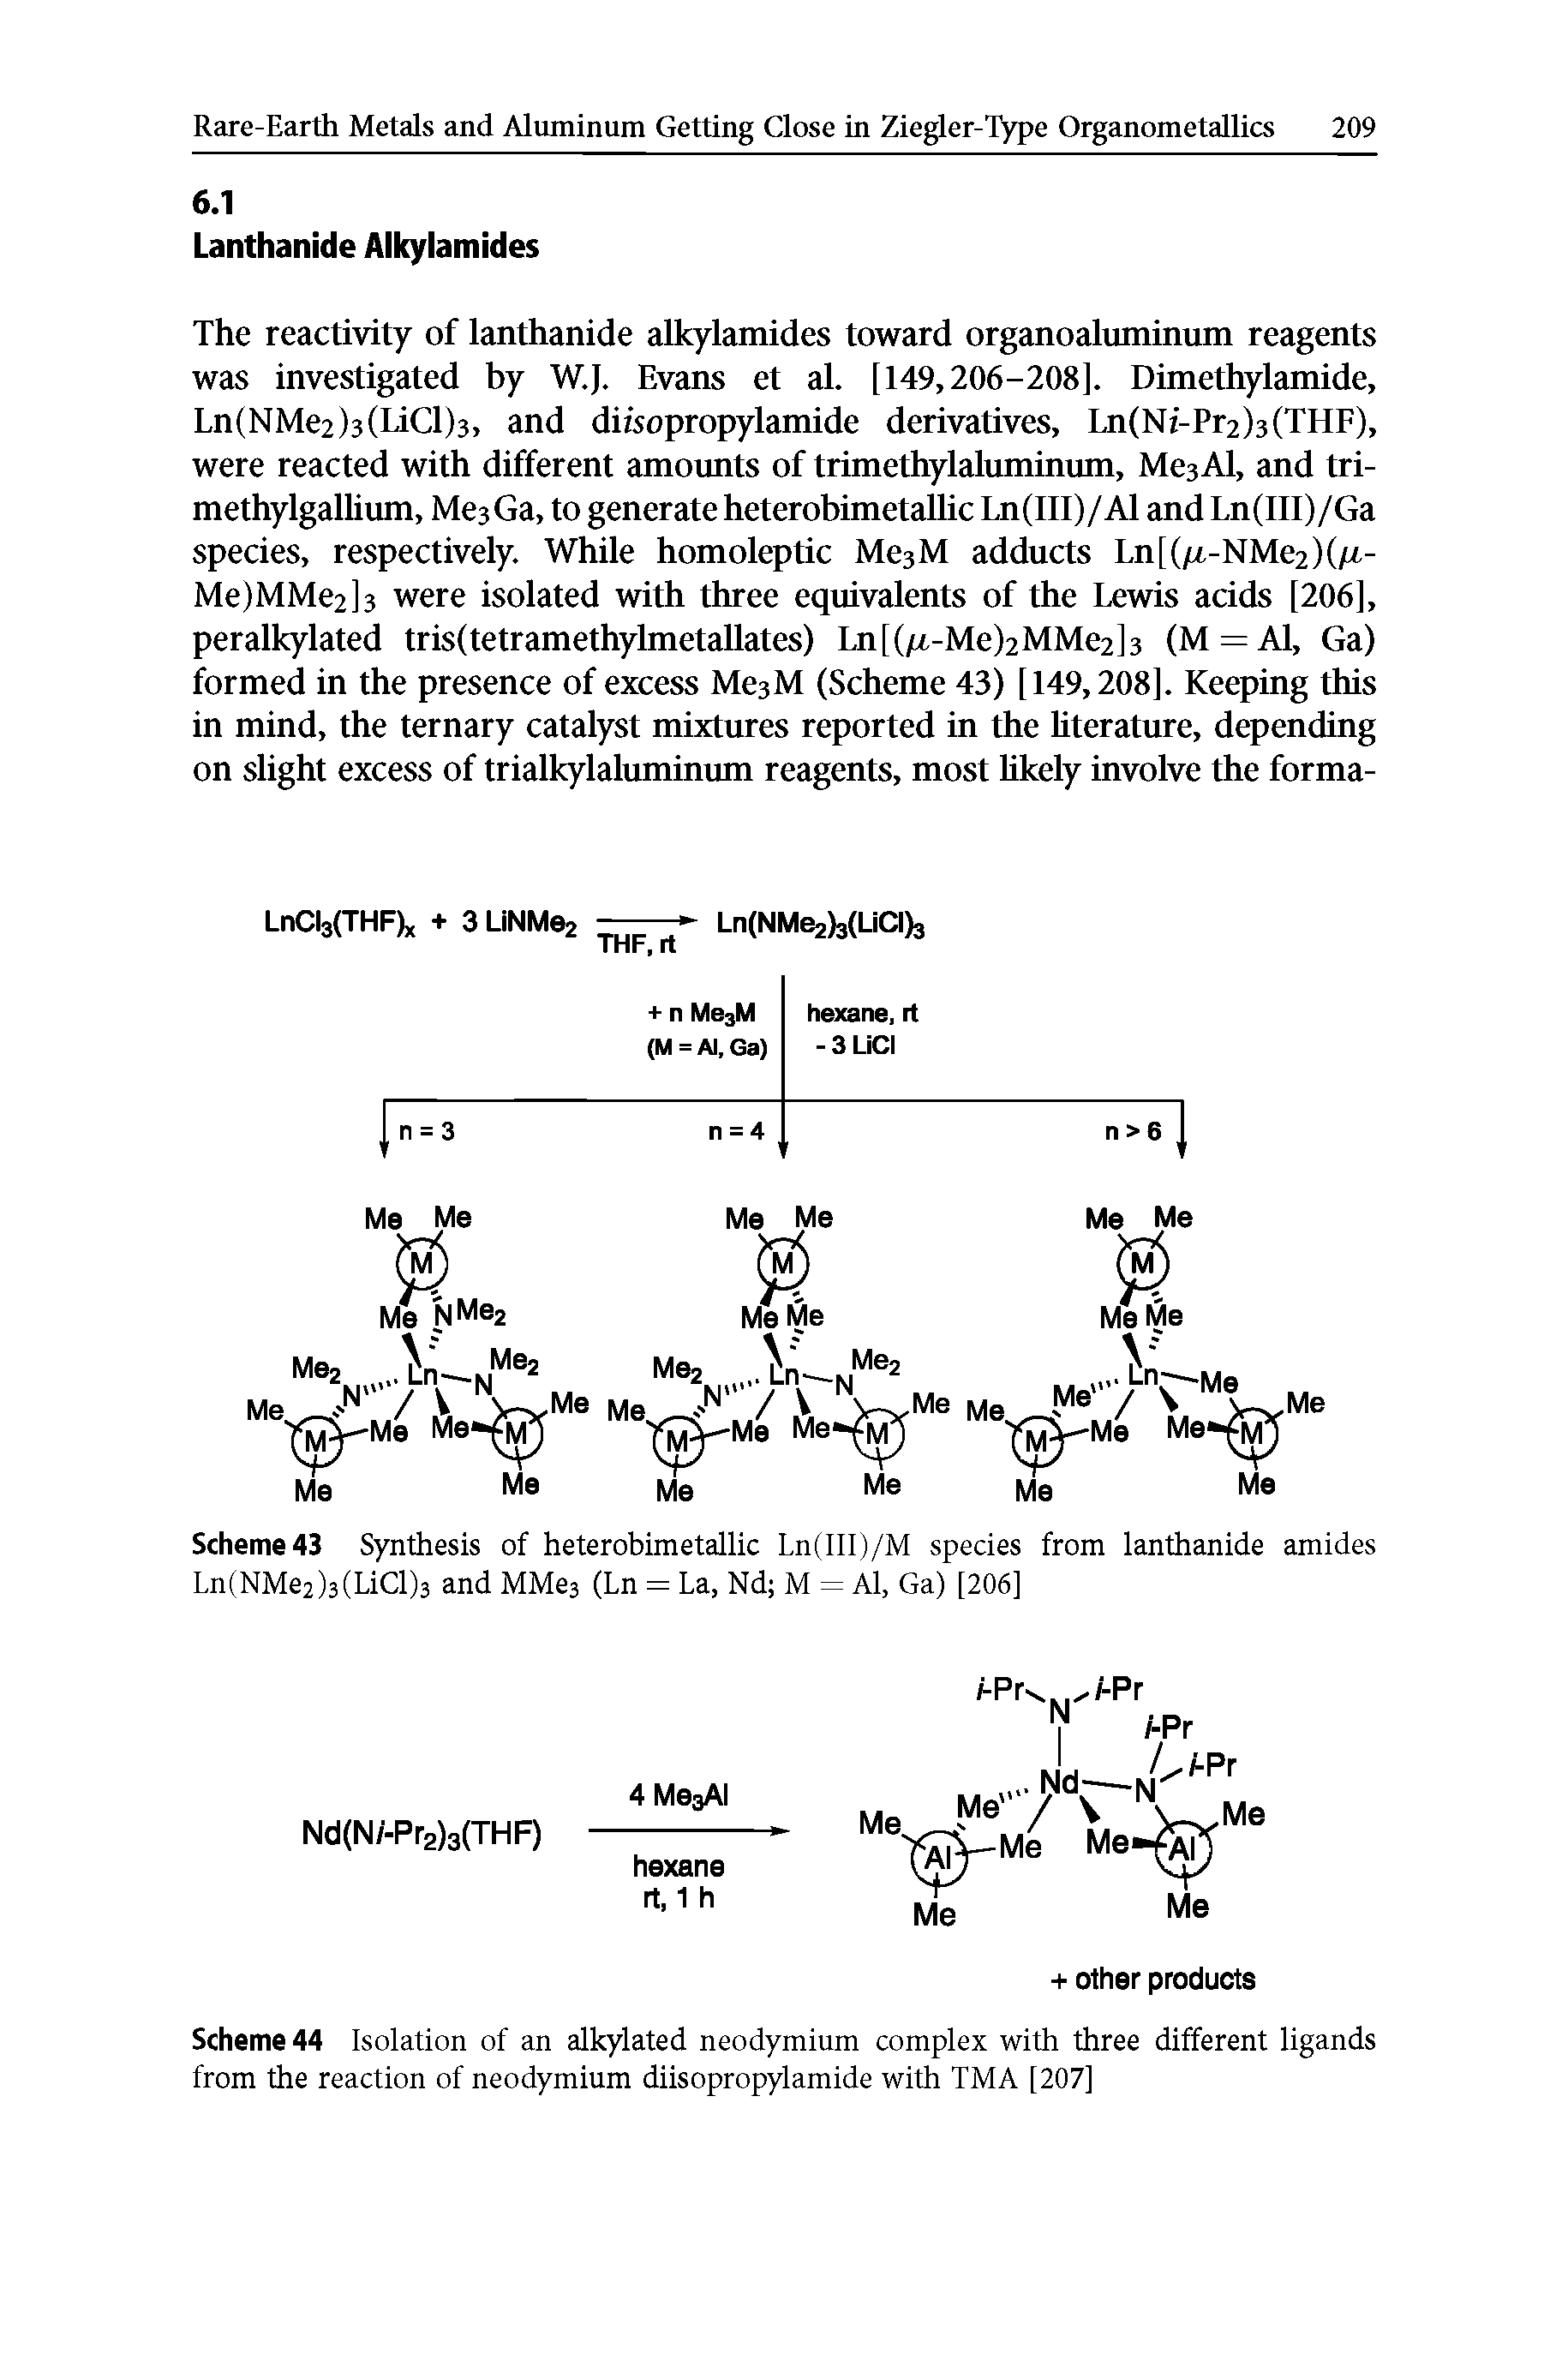 Scheme 44 Isolation of an alkylated neodymium complex with three different ligands from the reaction of neodymium diisopropylamide with TMA [207]...